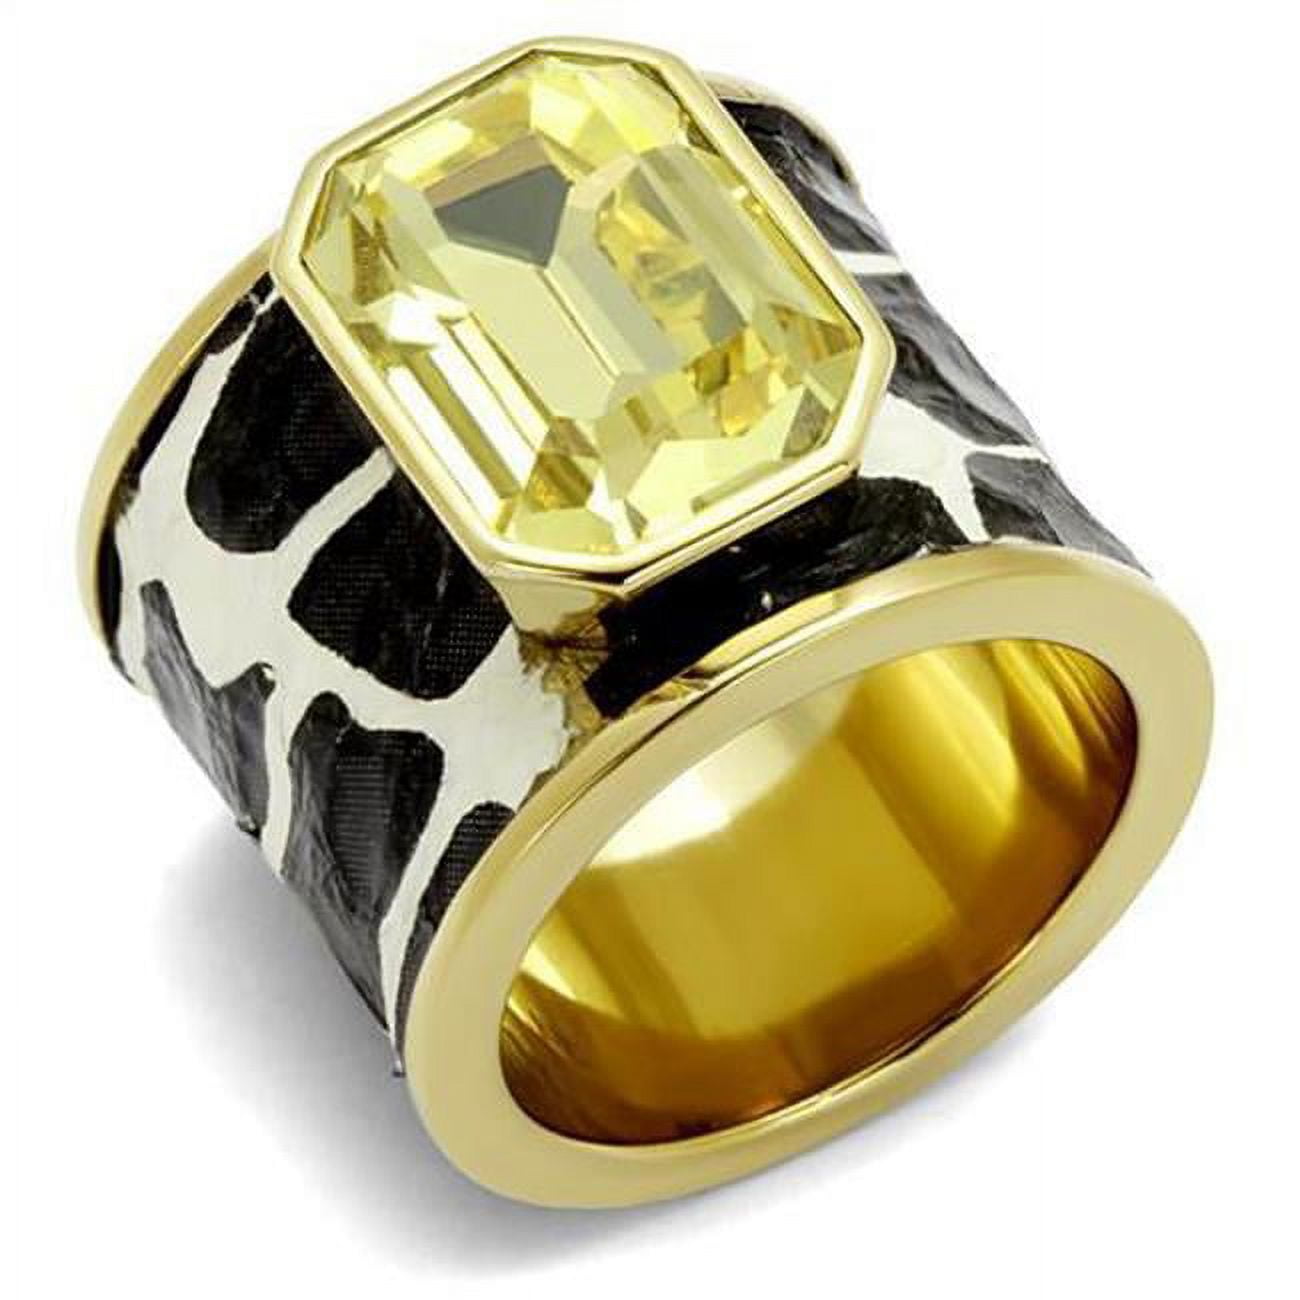 Alamode TK2701-9 Women IP Gold Stainless Steel Ring with Top Grade Crystal in Citrine Yellow - Size 9